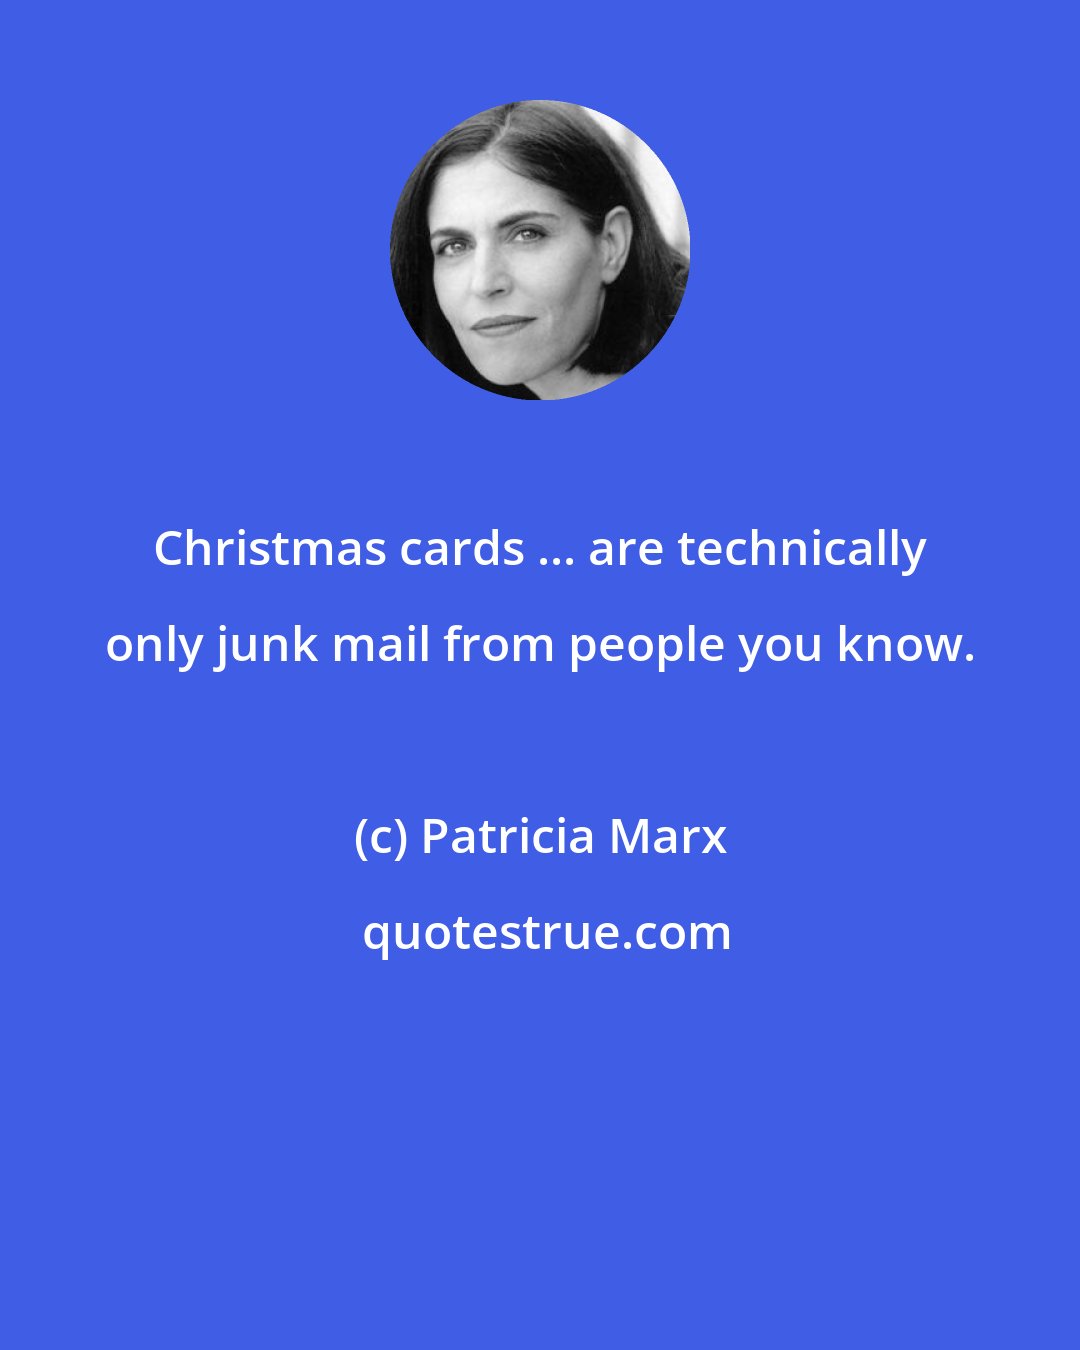 Patricia Marx: Christmas cards ... are technically only junk mail from people you know.